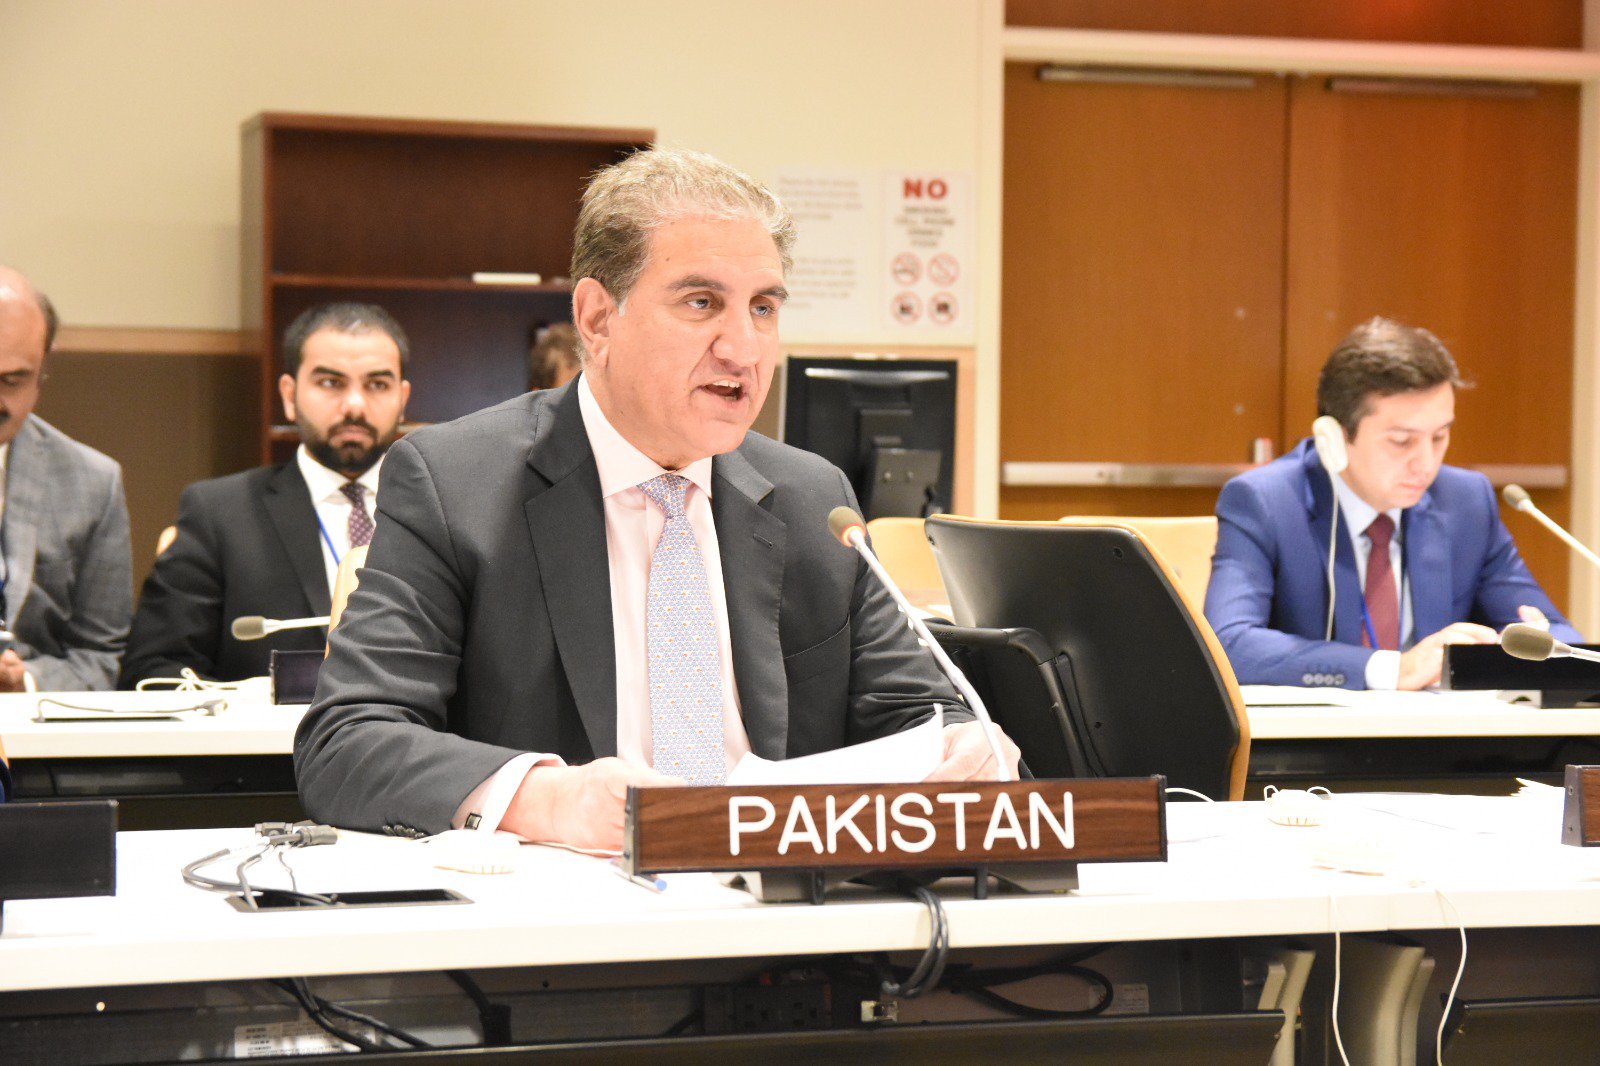 Will achieve all targets of FATF to get out of grey list: Pakistan Foreign Minister